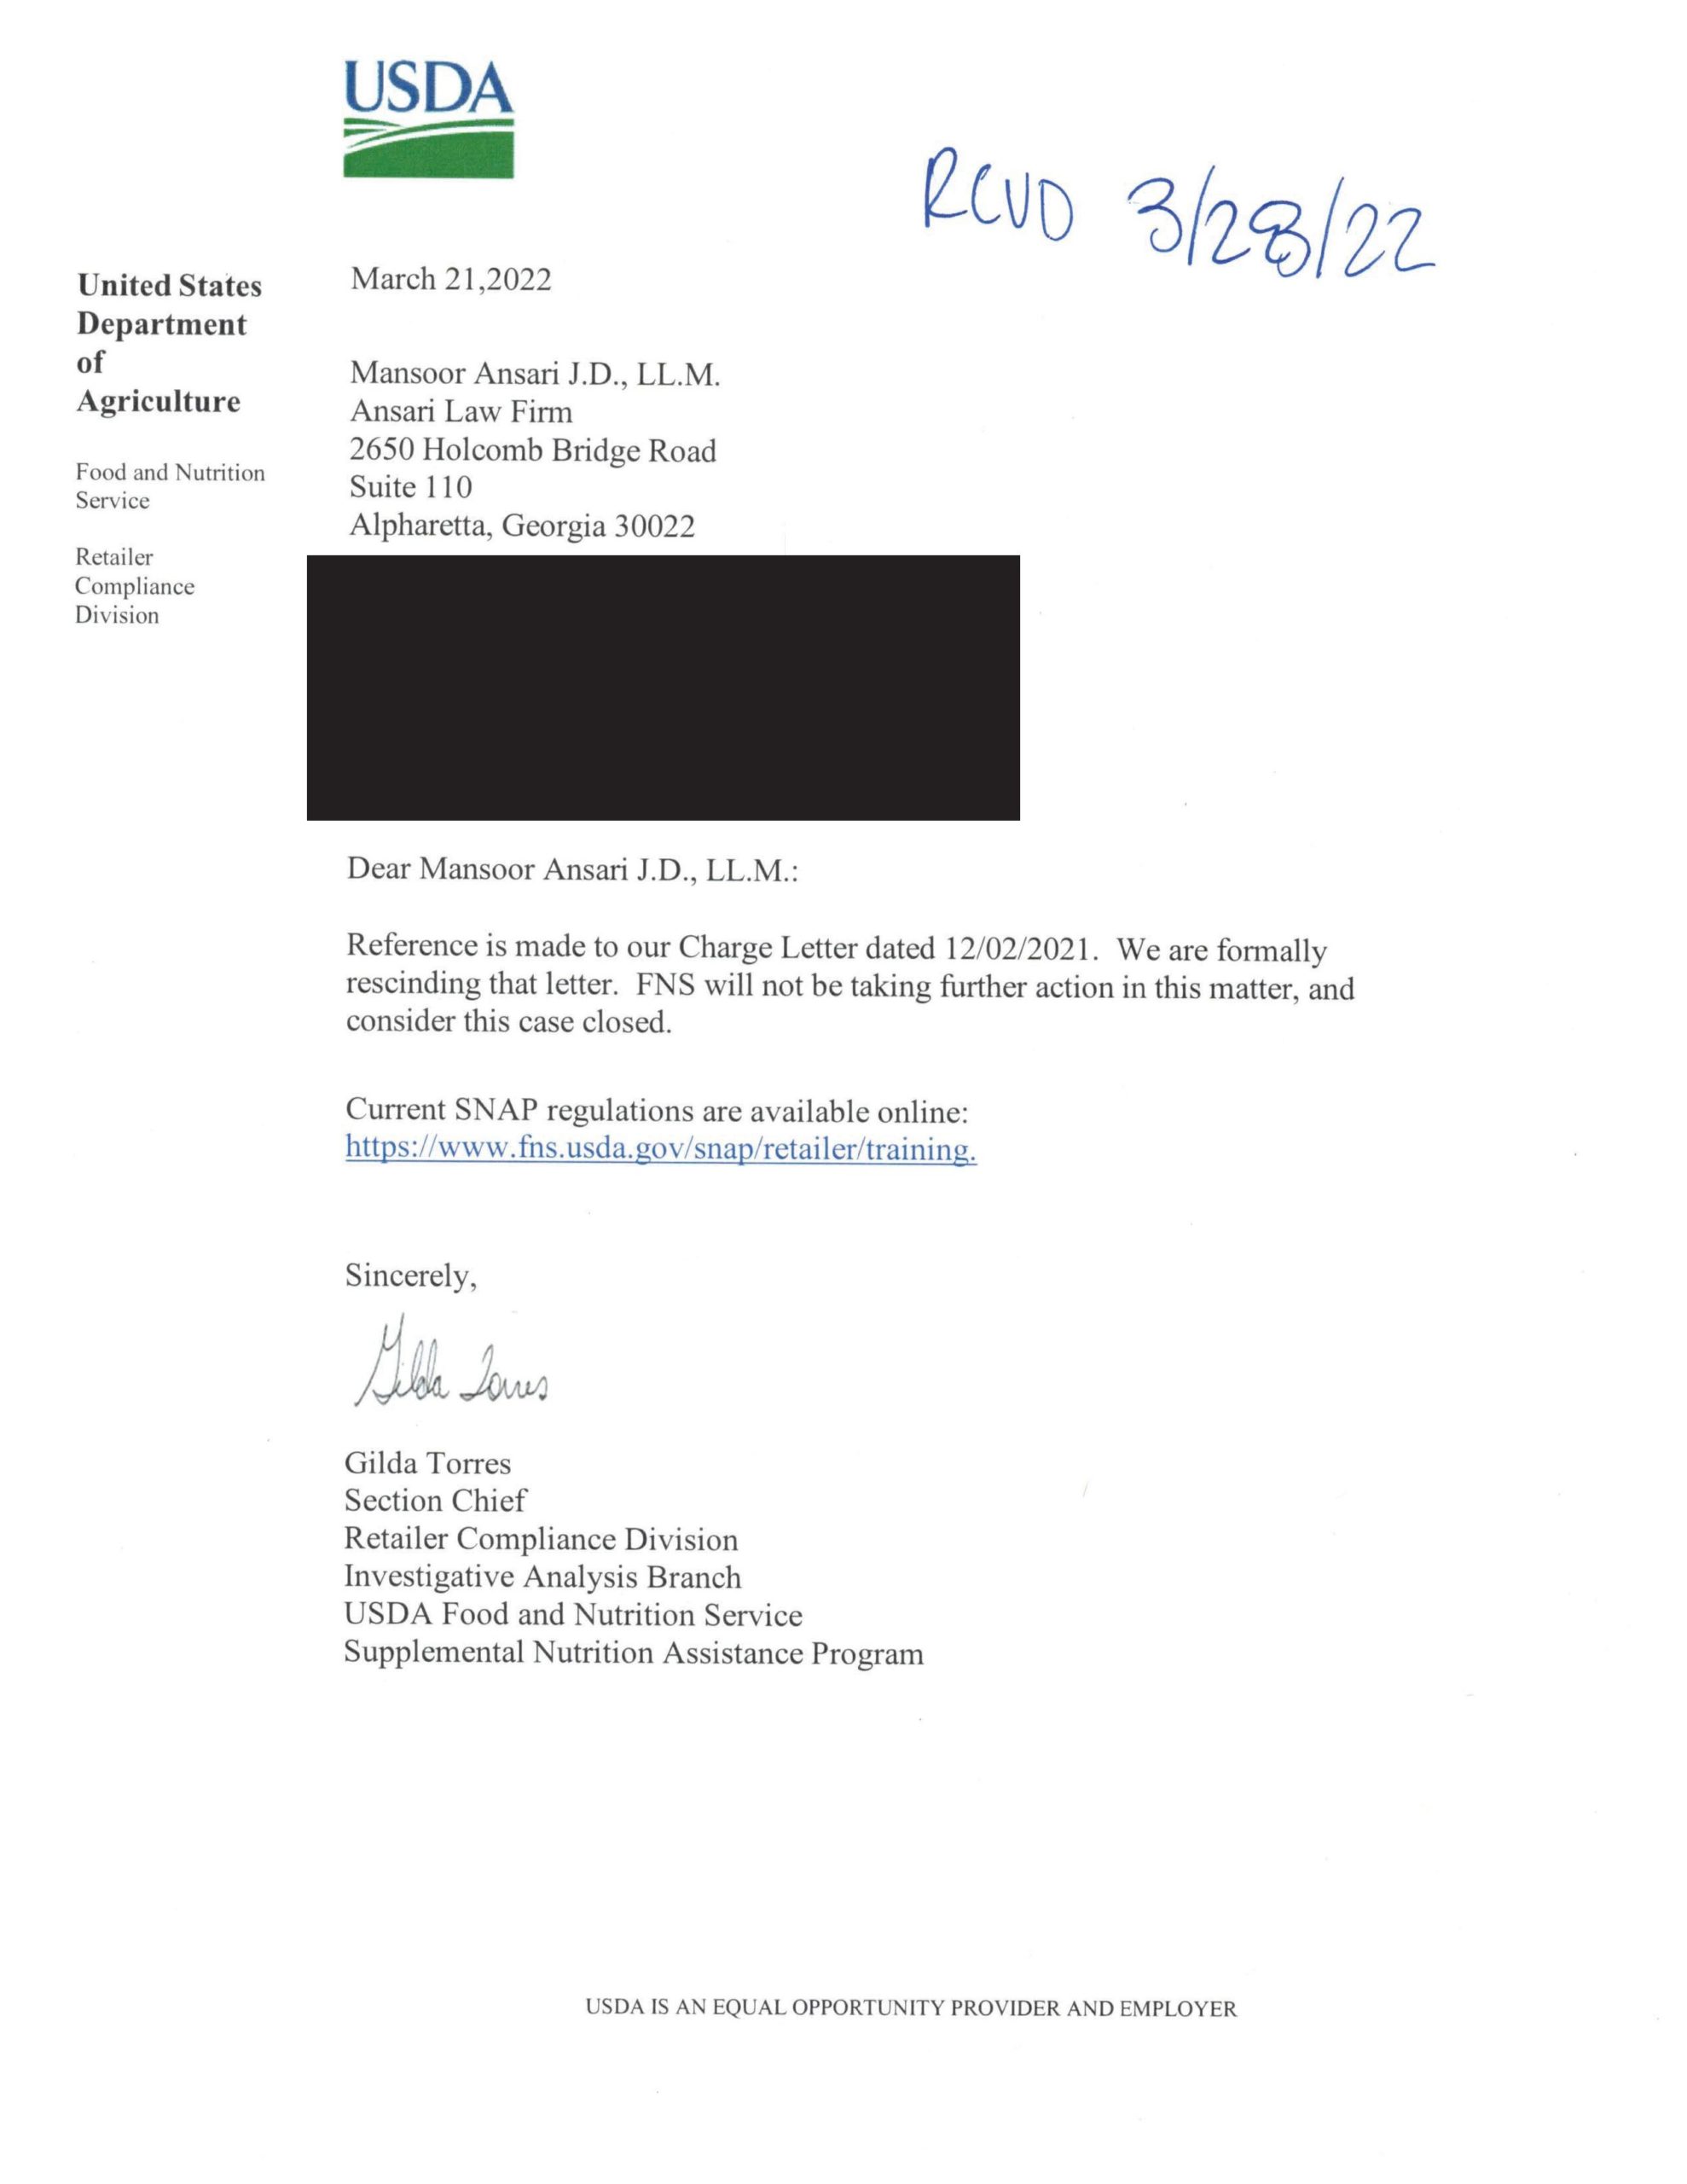 Ansari Law Firm SAlk-Final-Decision-Redacted-page-001-scaled Home  